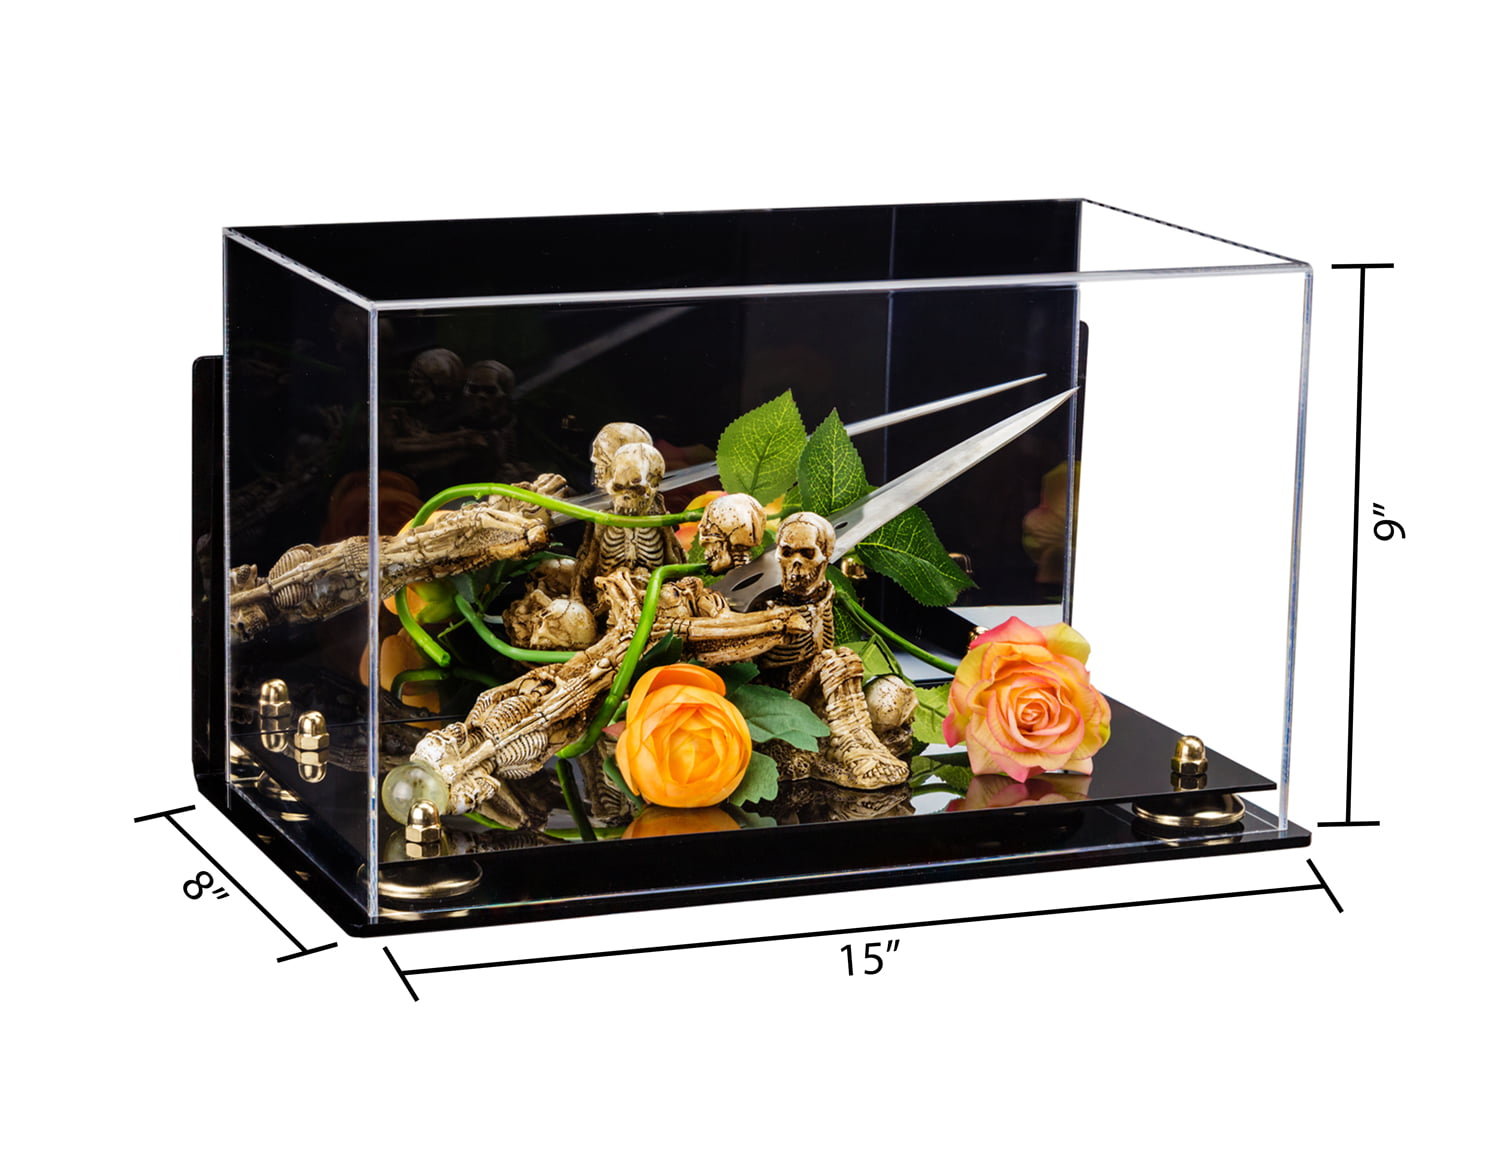 A013-GR Versatile Clear Acrylic Display Case with Gold Risers 15" x 8" x 9" 